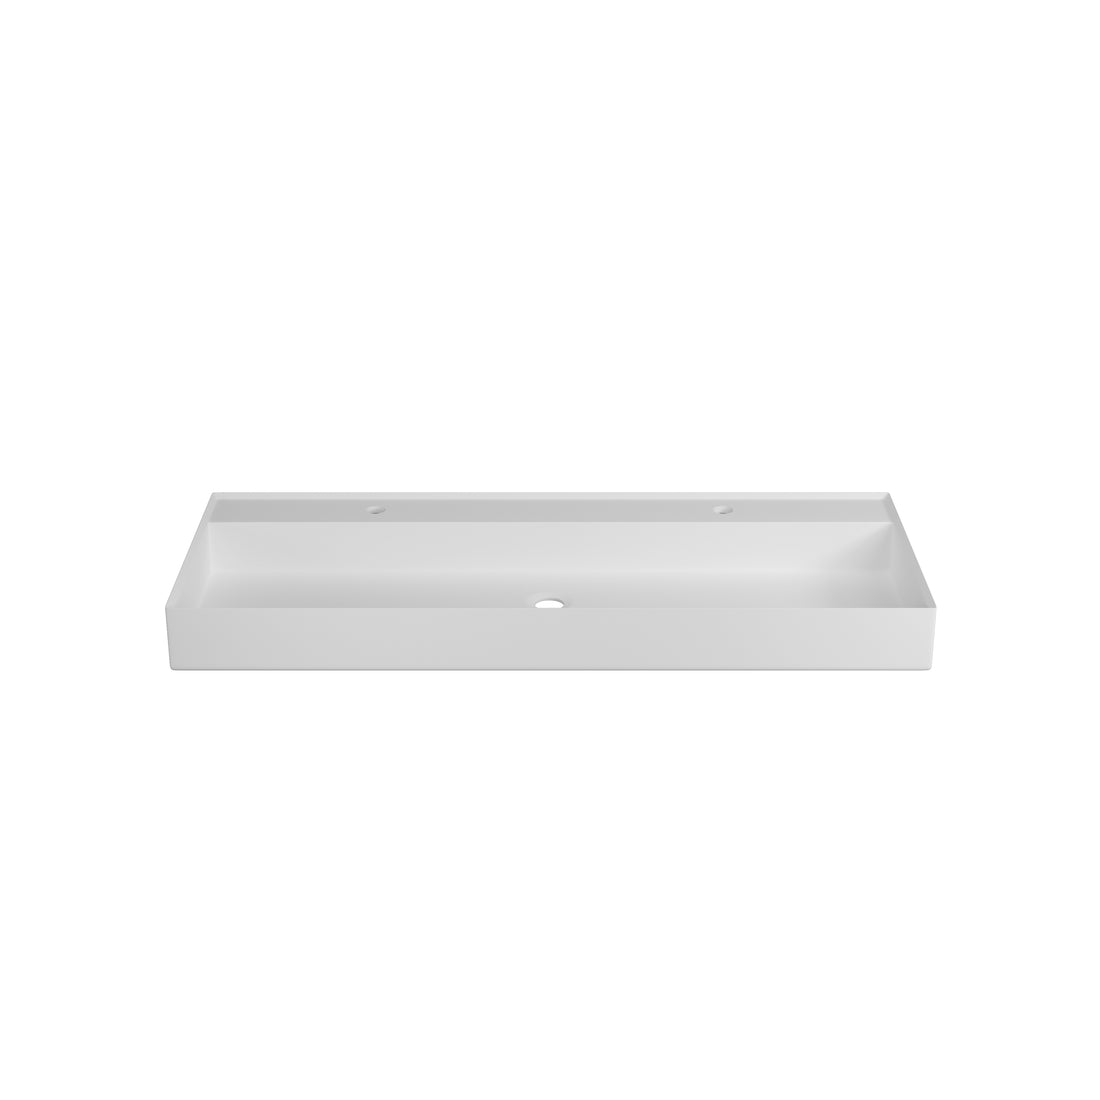 Double Faucet Hole Solid Surface Basin - White